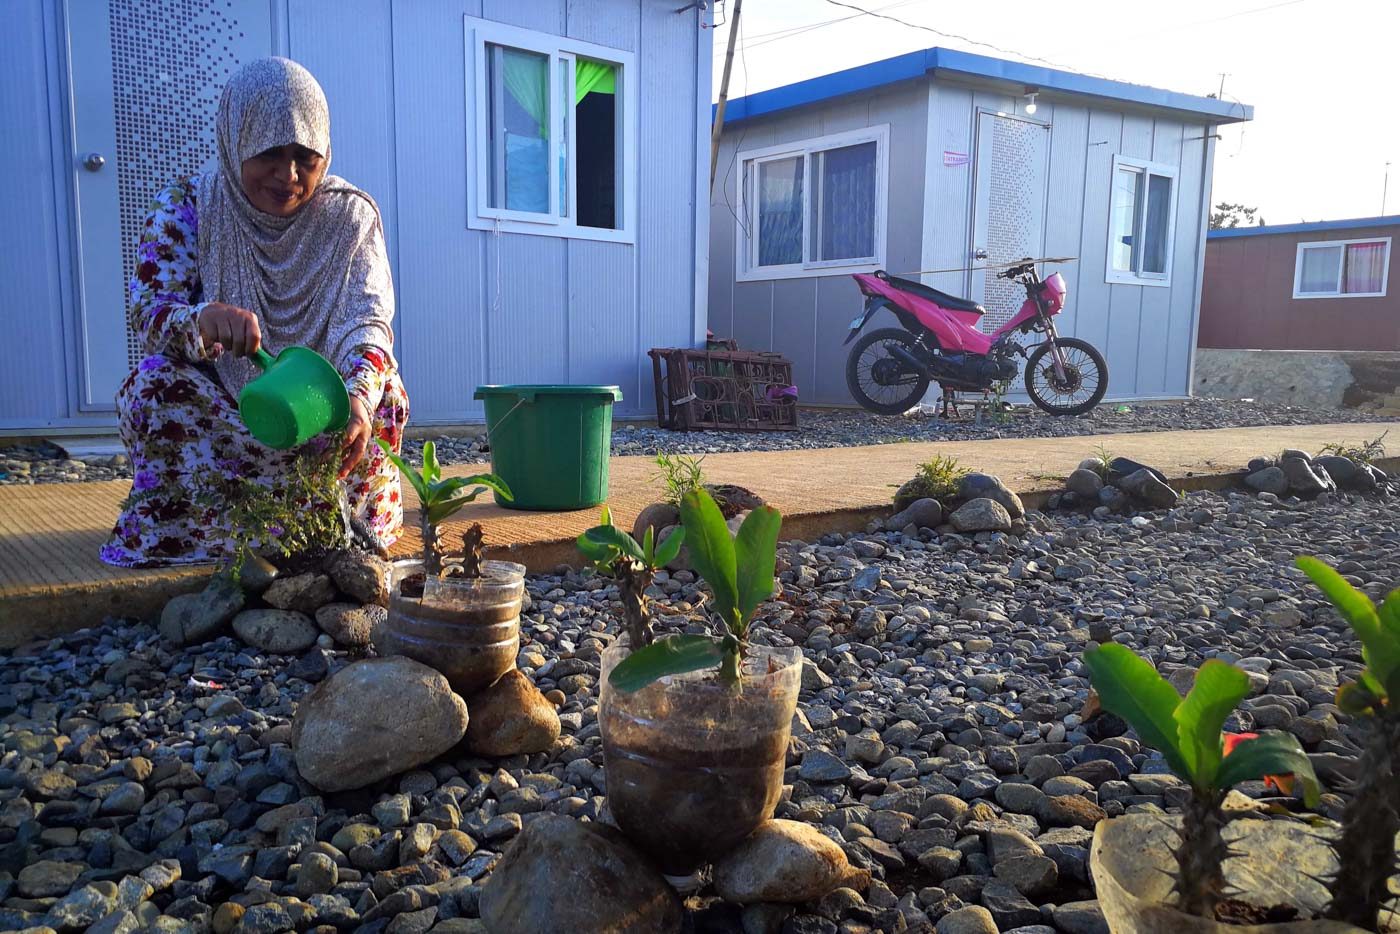 INGENUITY. A Maranao woman waters her new plants. With a little creativity, she uses larger rocks to serve as pots for her otherwise rock-covered space. She said she plans to cover her space with soil to make it more productive. Photo by Bobby Lagsa/Rappler  